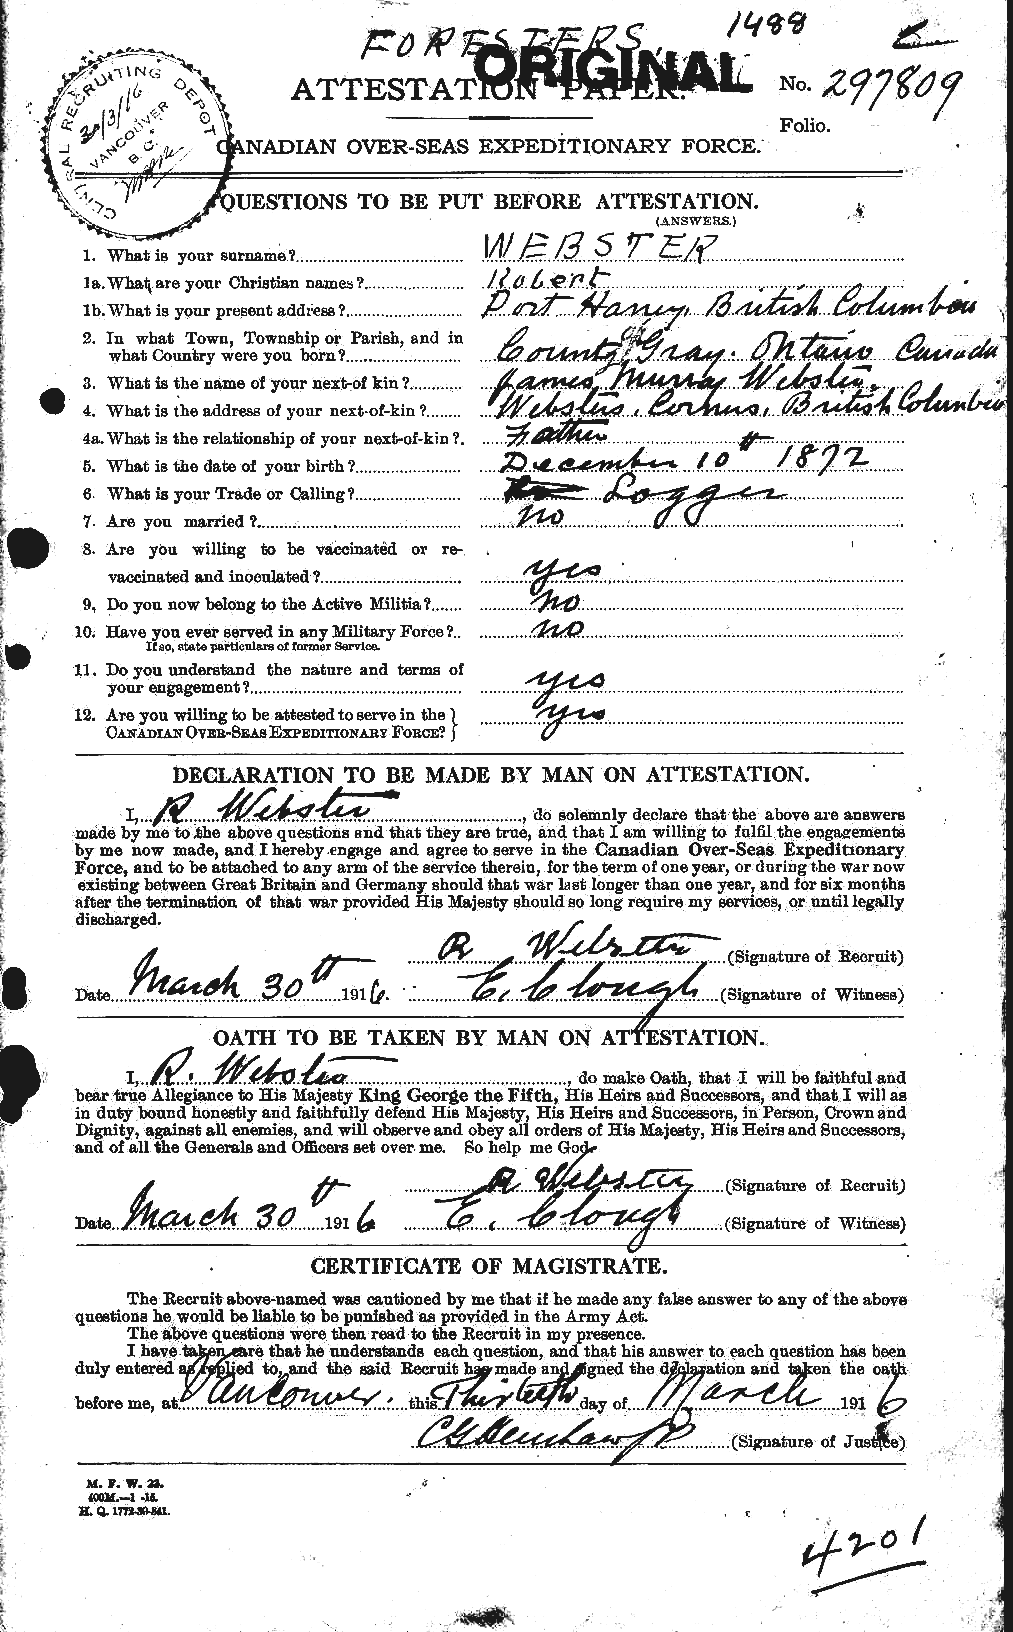 Personnel Records of the First World War - CEF 661964a